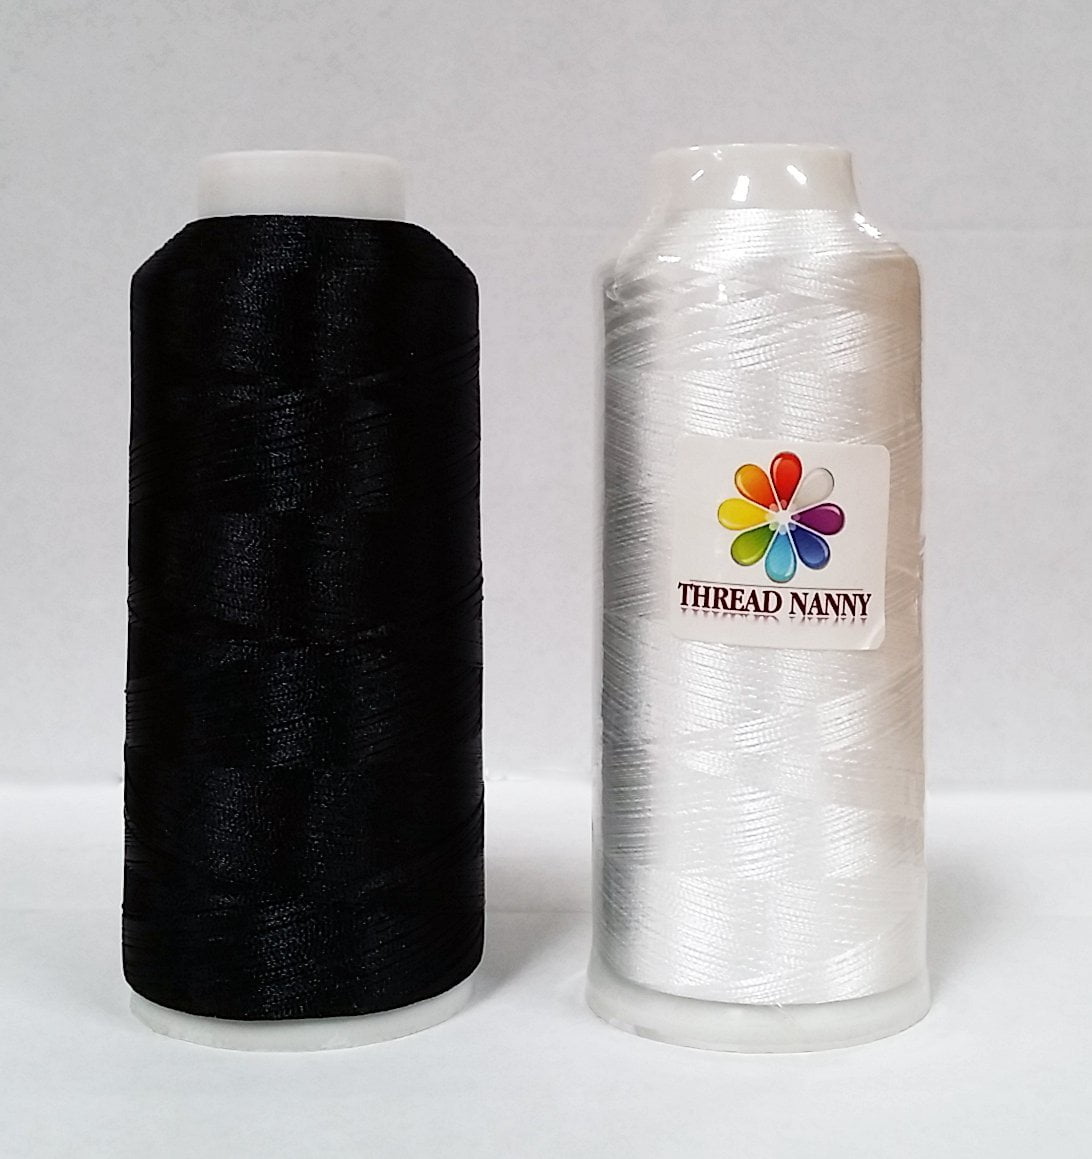 ThreadNanny 144pcs White Prewound Bobbin Thread Plastic Size A (SA156)  Works with Brother Embroidery and Sewing Machine Polyester Thread